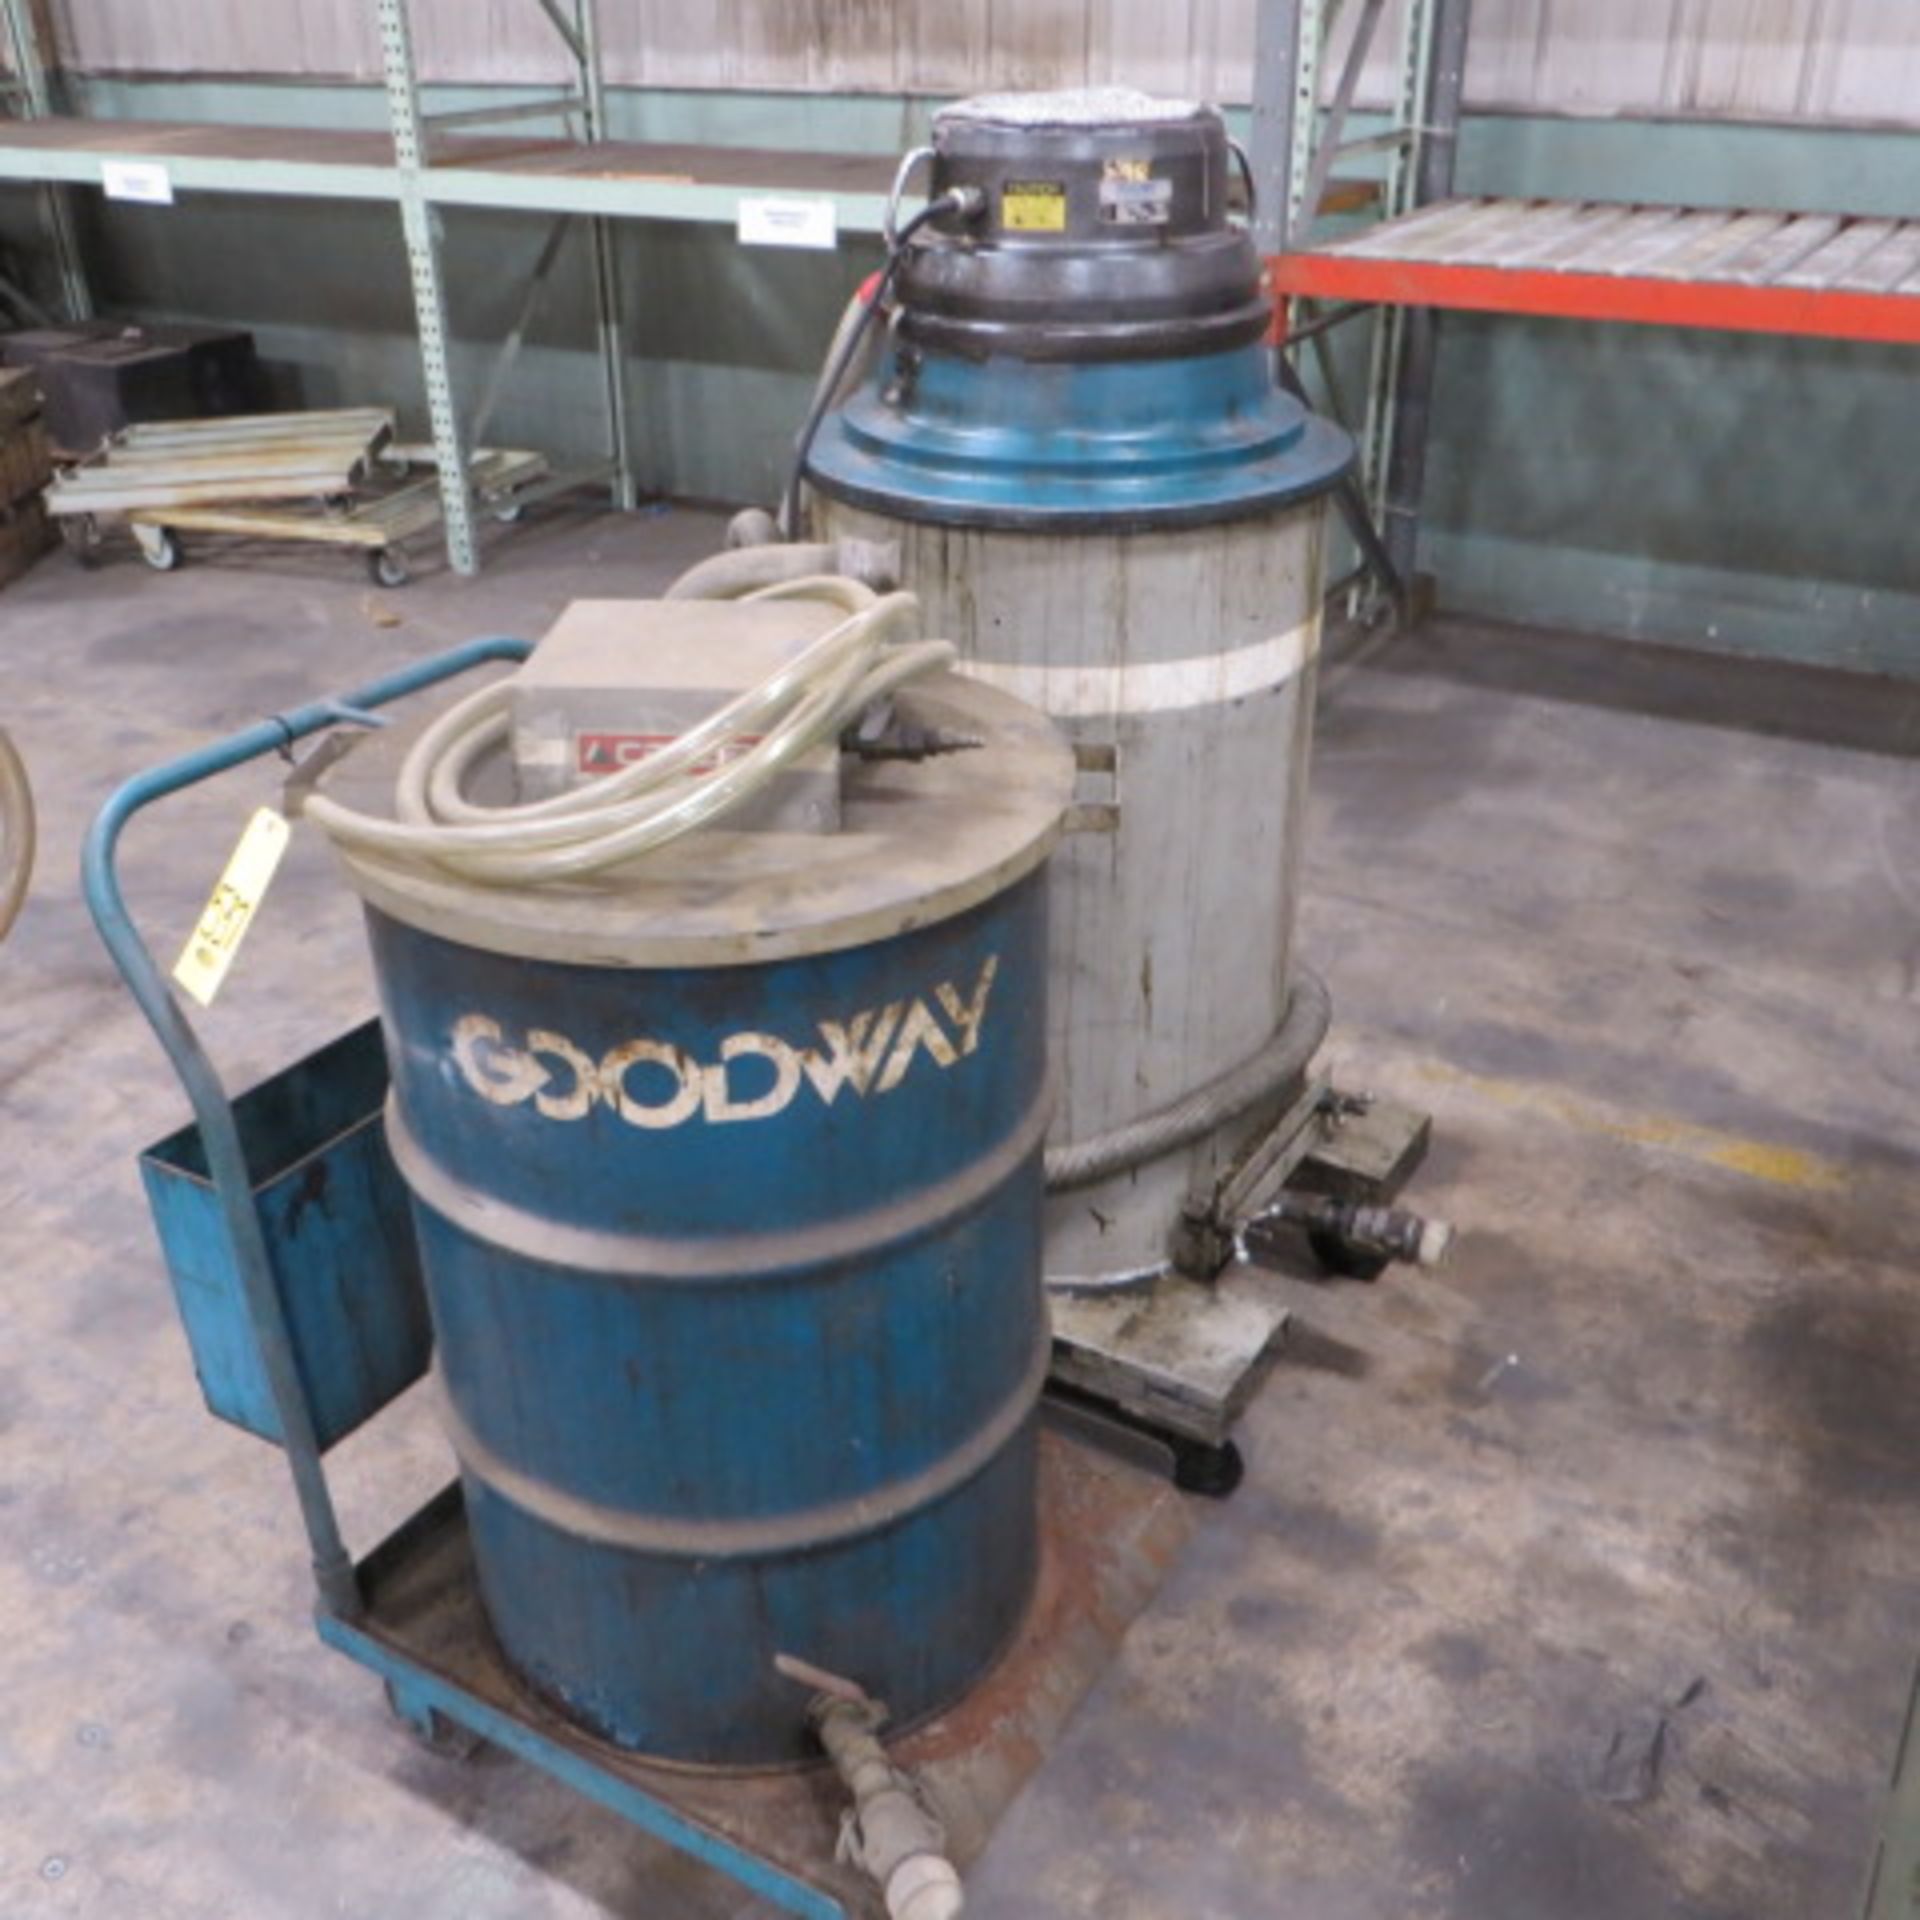 CECOR AIR POWERED FLUID SUCTIONING UNIT